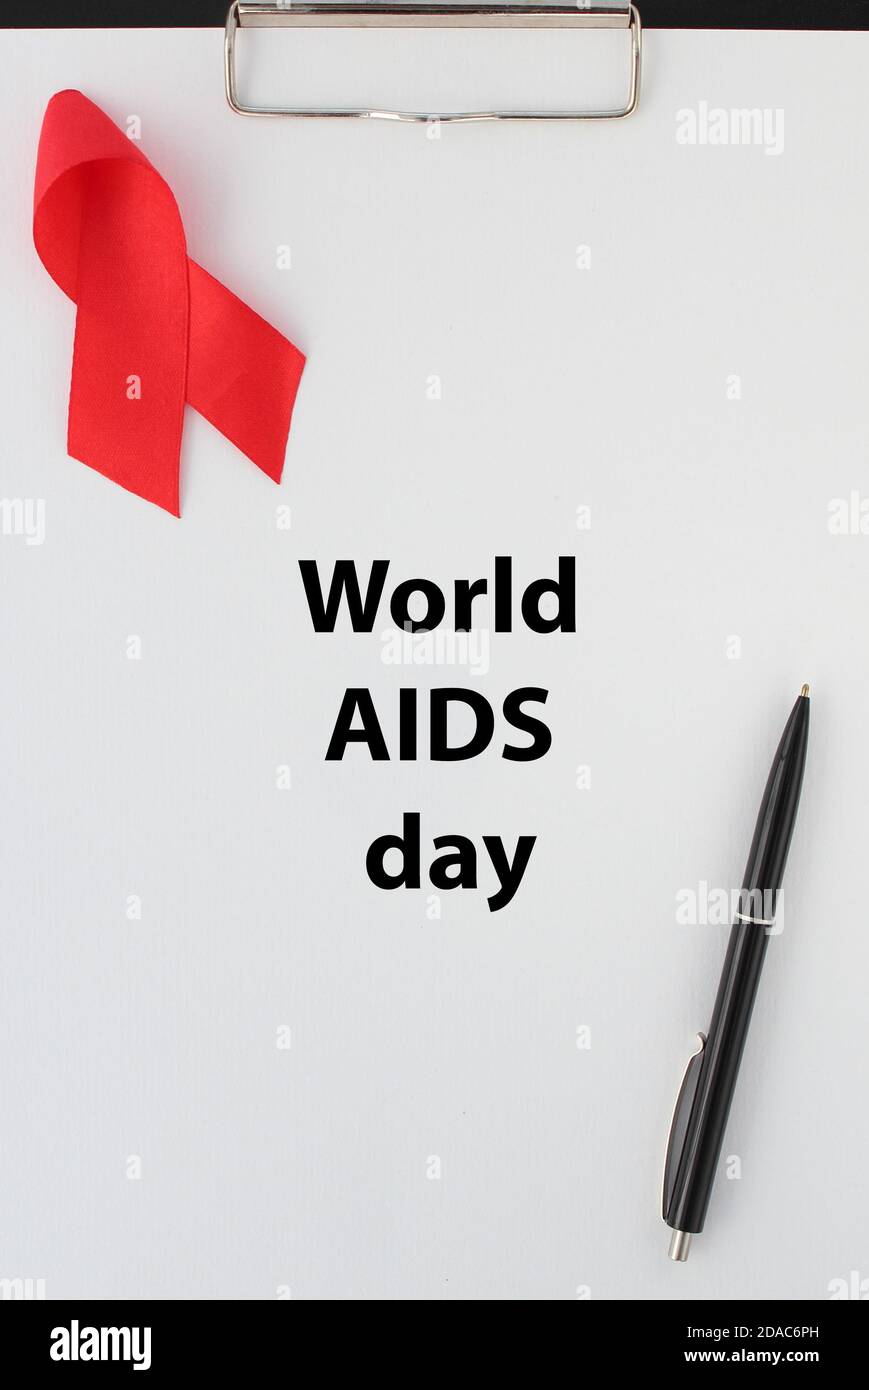 The red ribbon and title World AIDS day on white sheet of paper Stock Photo